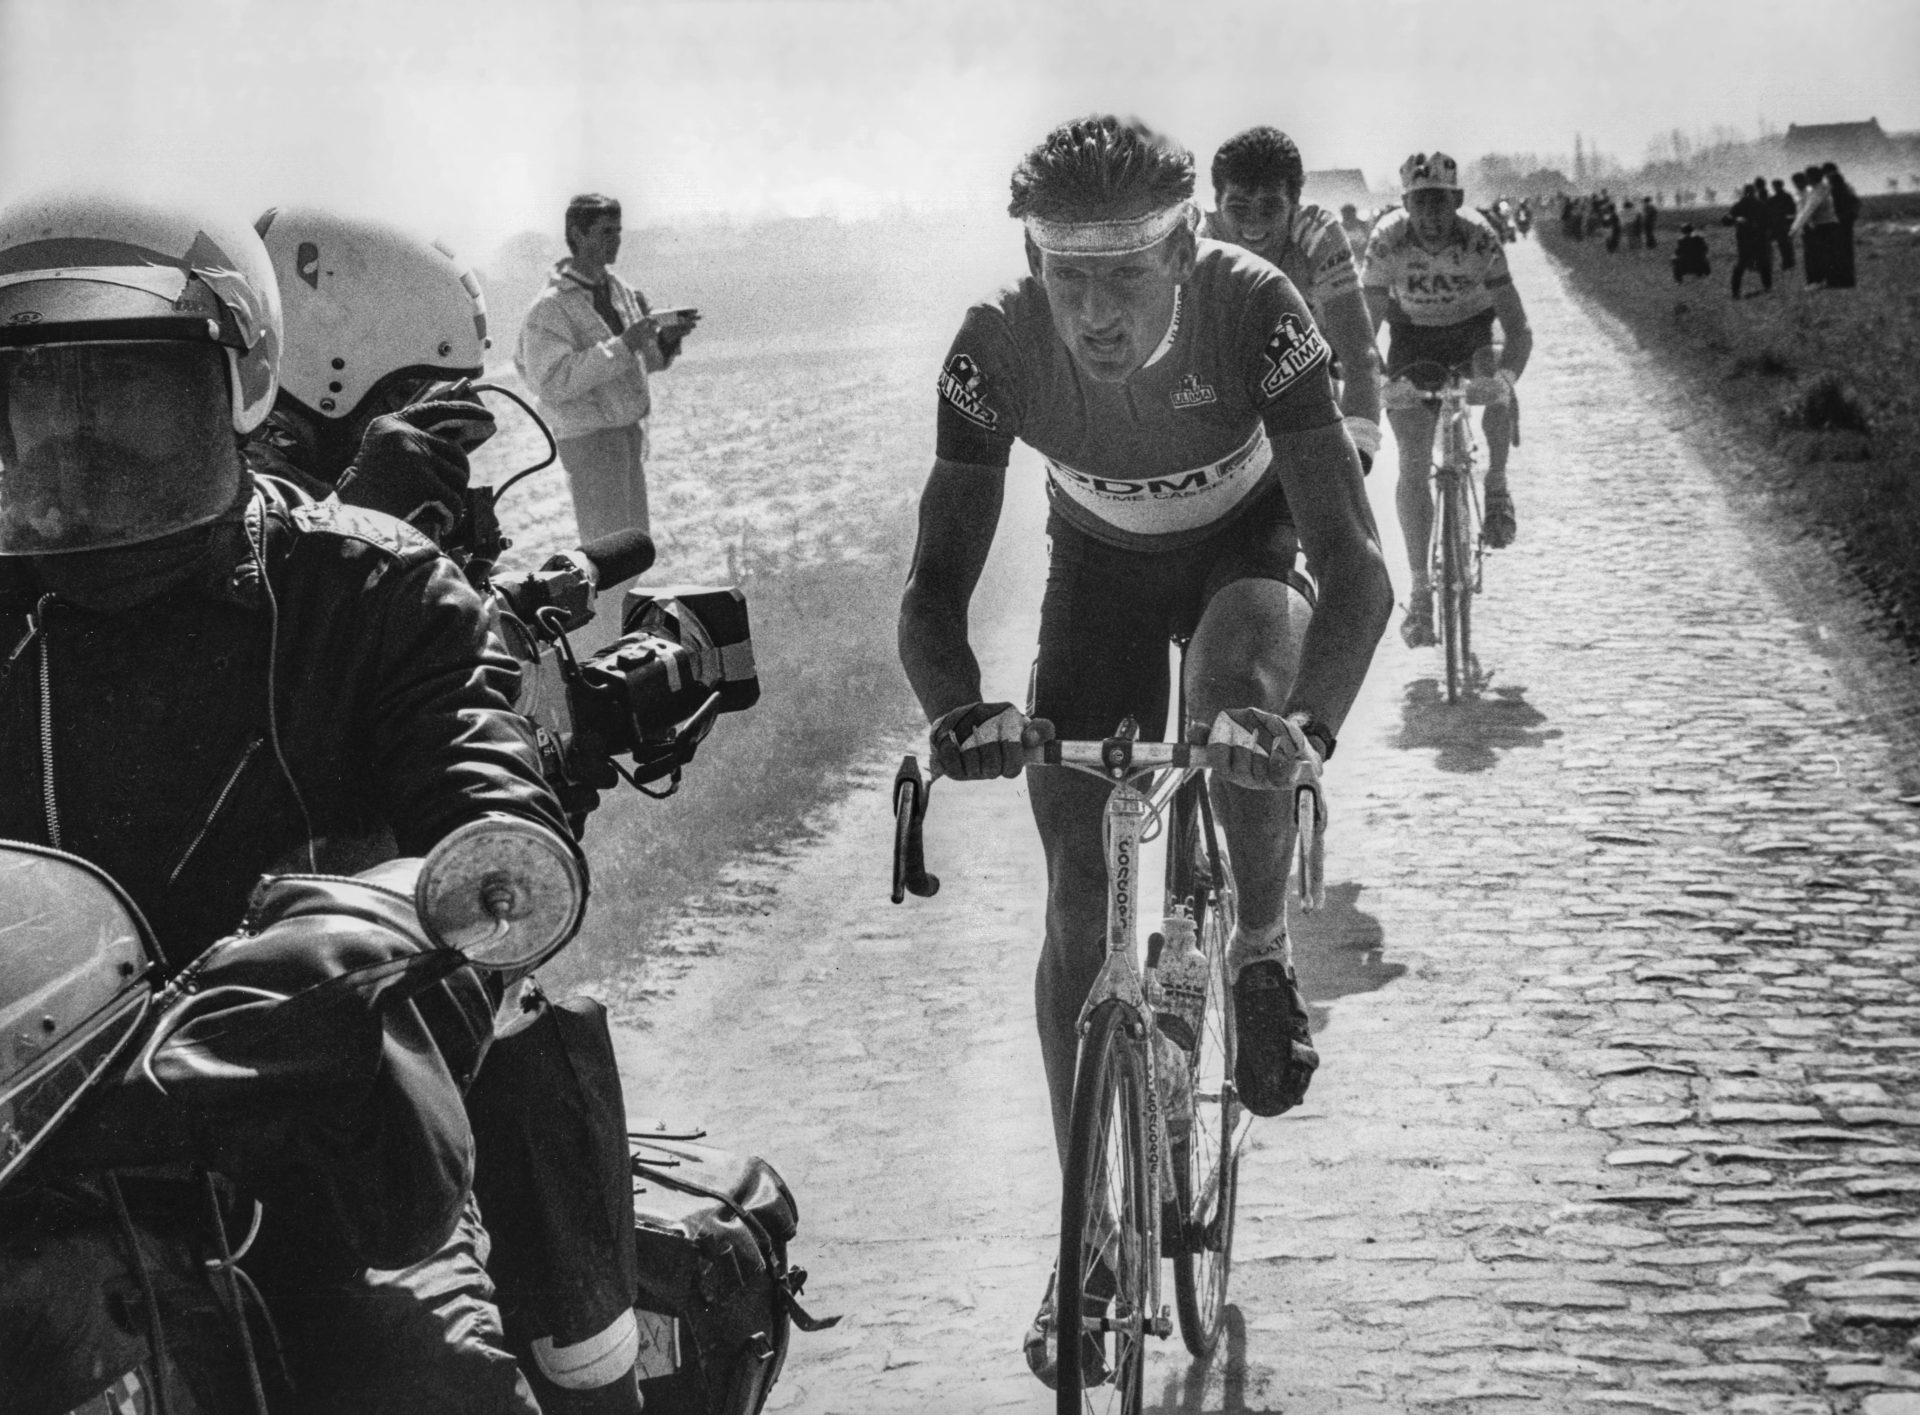 Another old edition of Paris-Roubaix, where Adrie van der Poel (wearing a large, 80s-era headband and no helmet) leads a line of cyclists on dry, dusty cobbles.